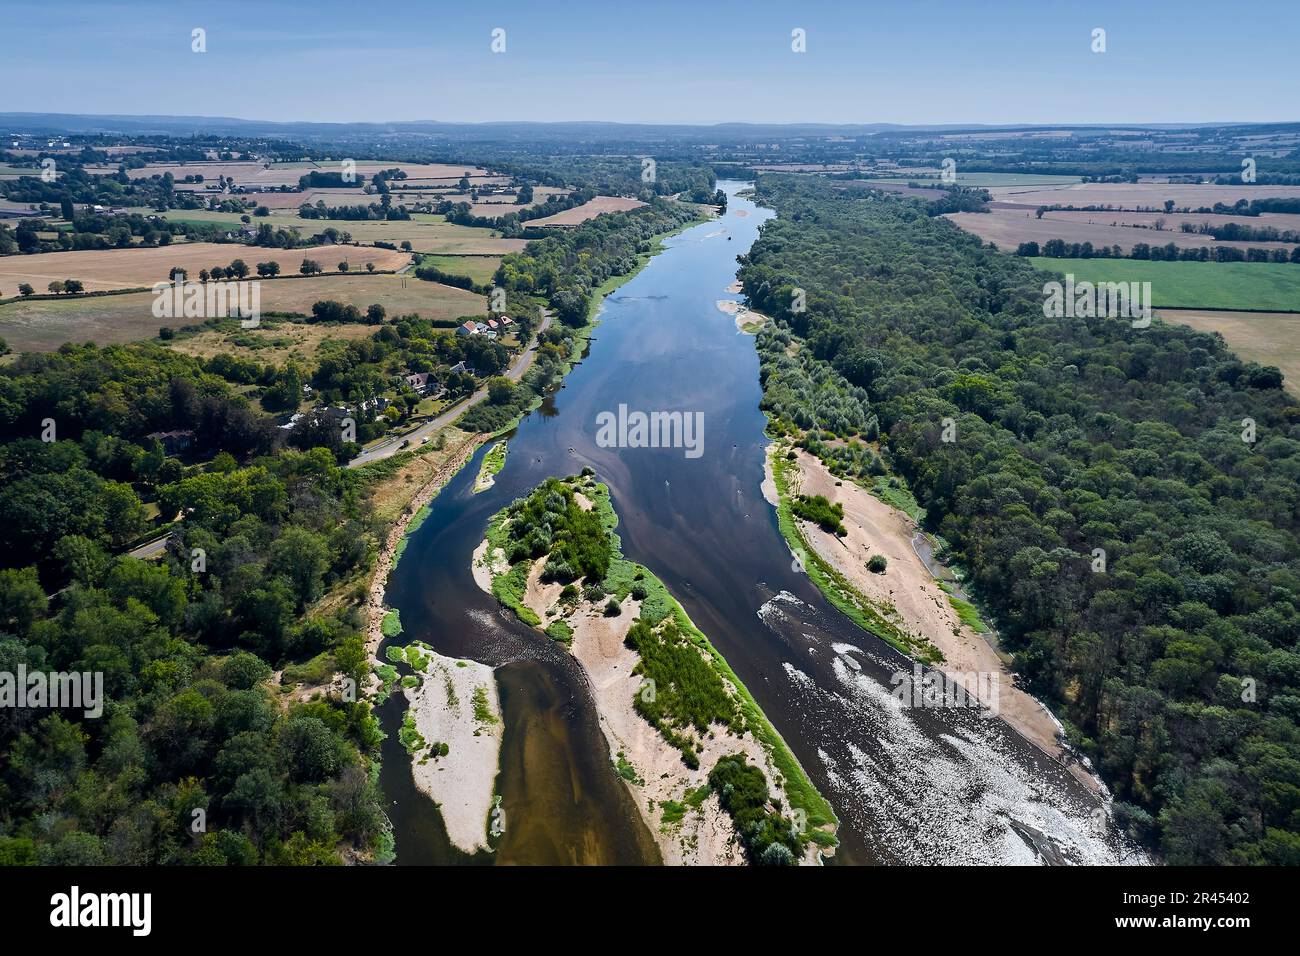 The Allier headland, confluence of the River Loire and River Allier at Cuffy. Sandbanks and natural landscape Stock Photo